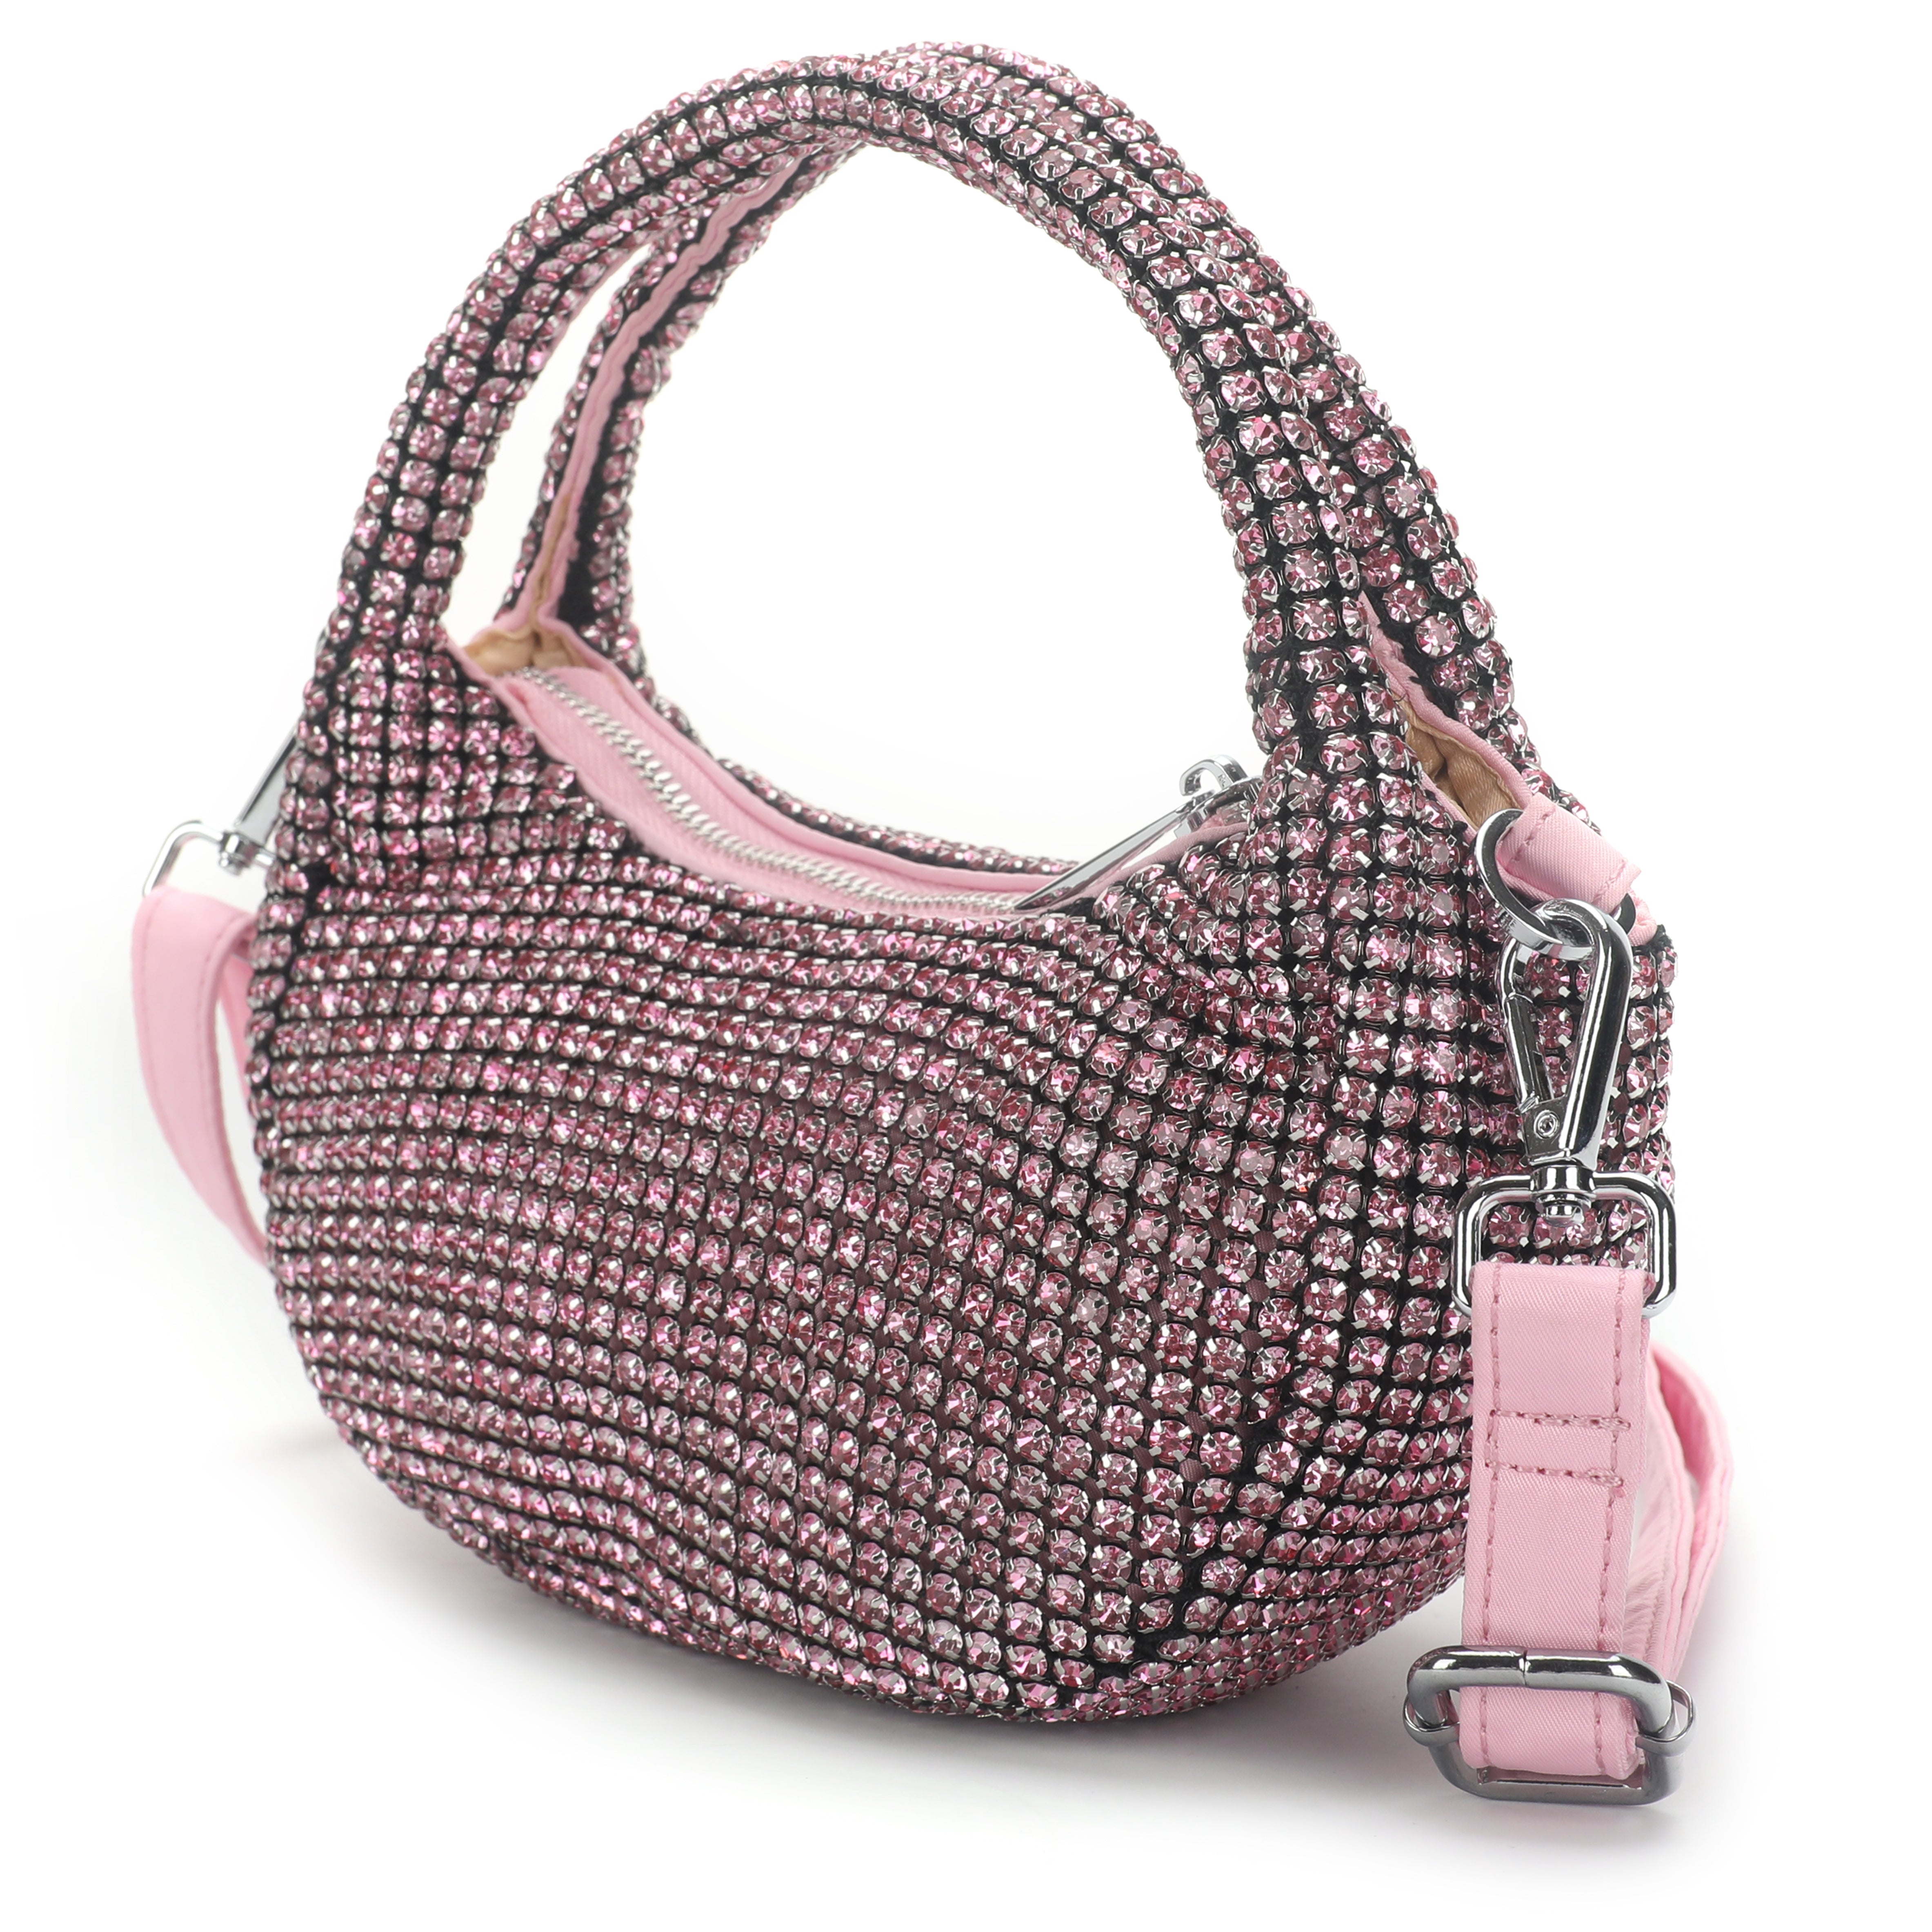 THE MINI MONA PARTY HANDBAG - SPARKLY PINK - EXCLUSIVE Bags from SILFEN - Just €79.99! SHOP NOW AT IAMINHATELOVE BOTH IN STORE FOR CYPRUS AND ONLINE WORLDWIDE @ IAMINHATELOVE.COM